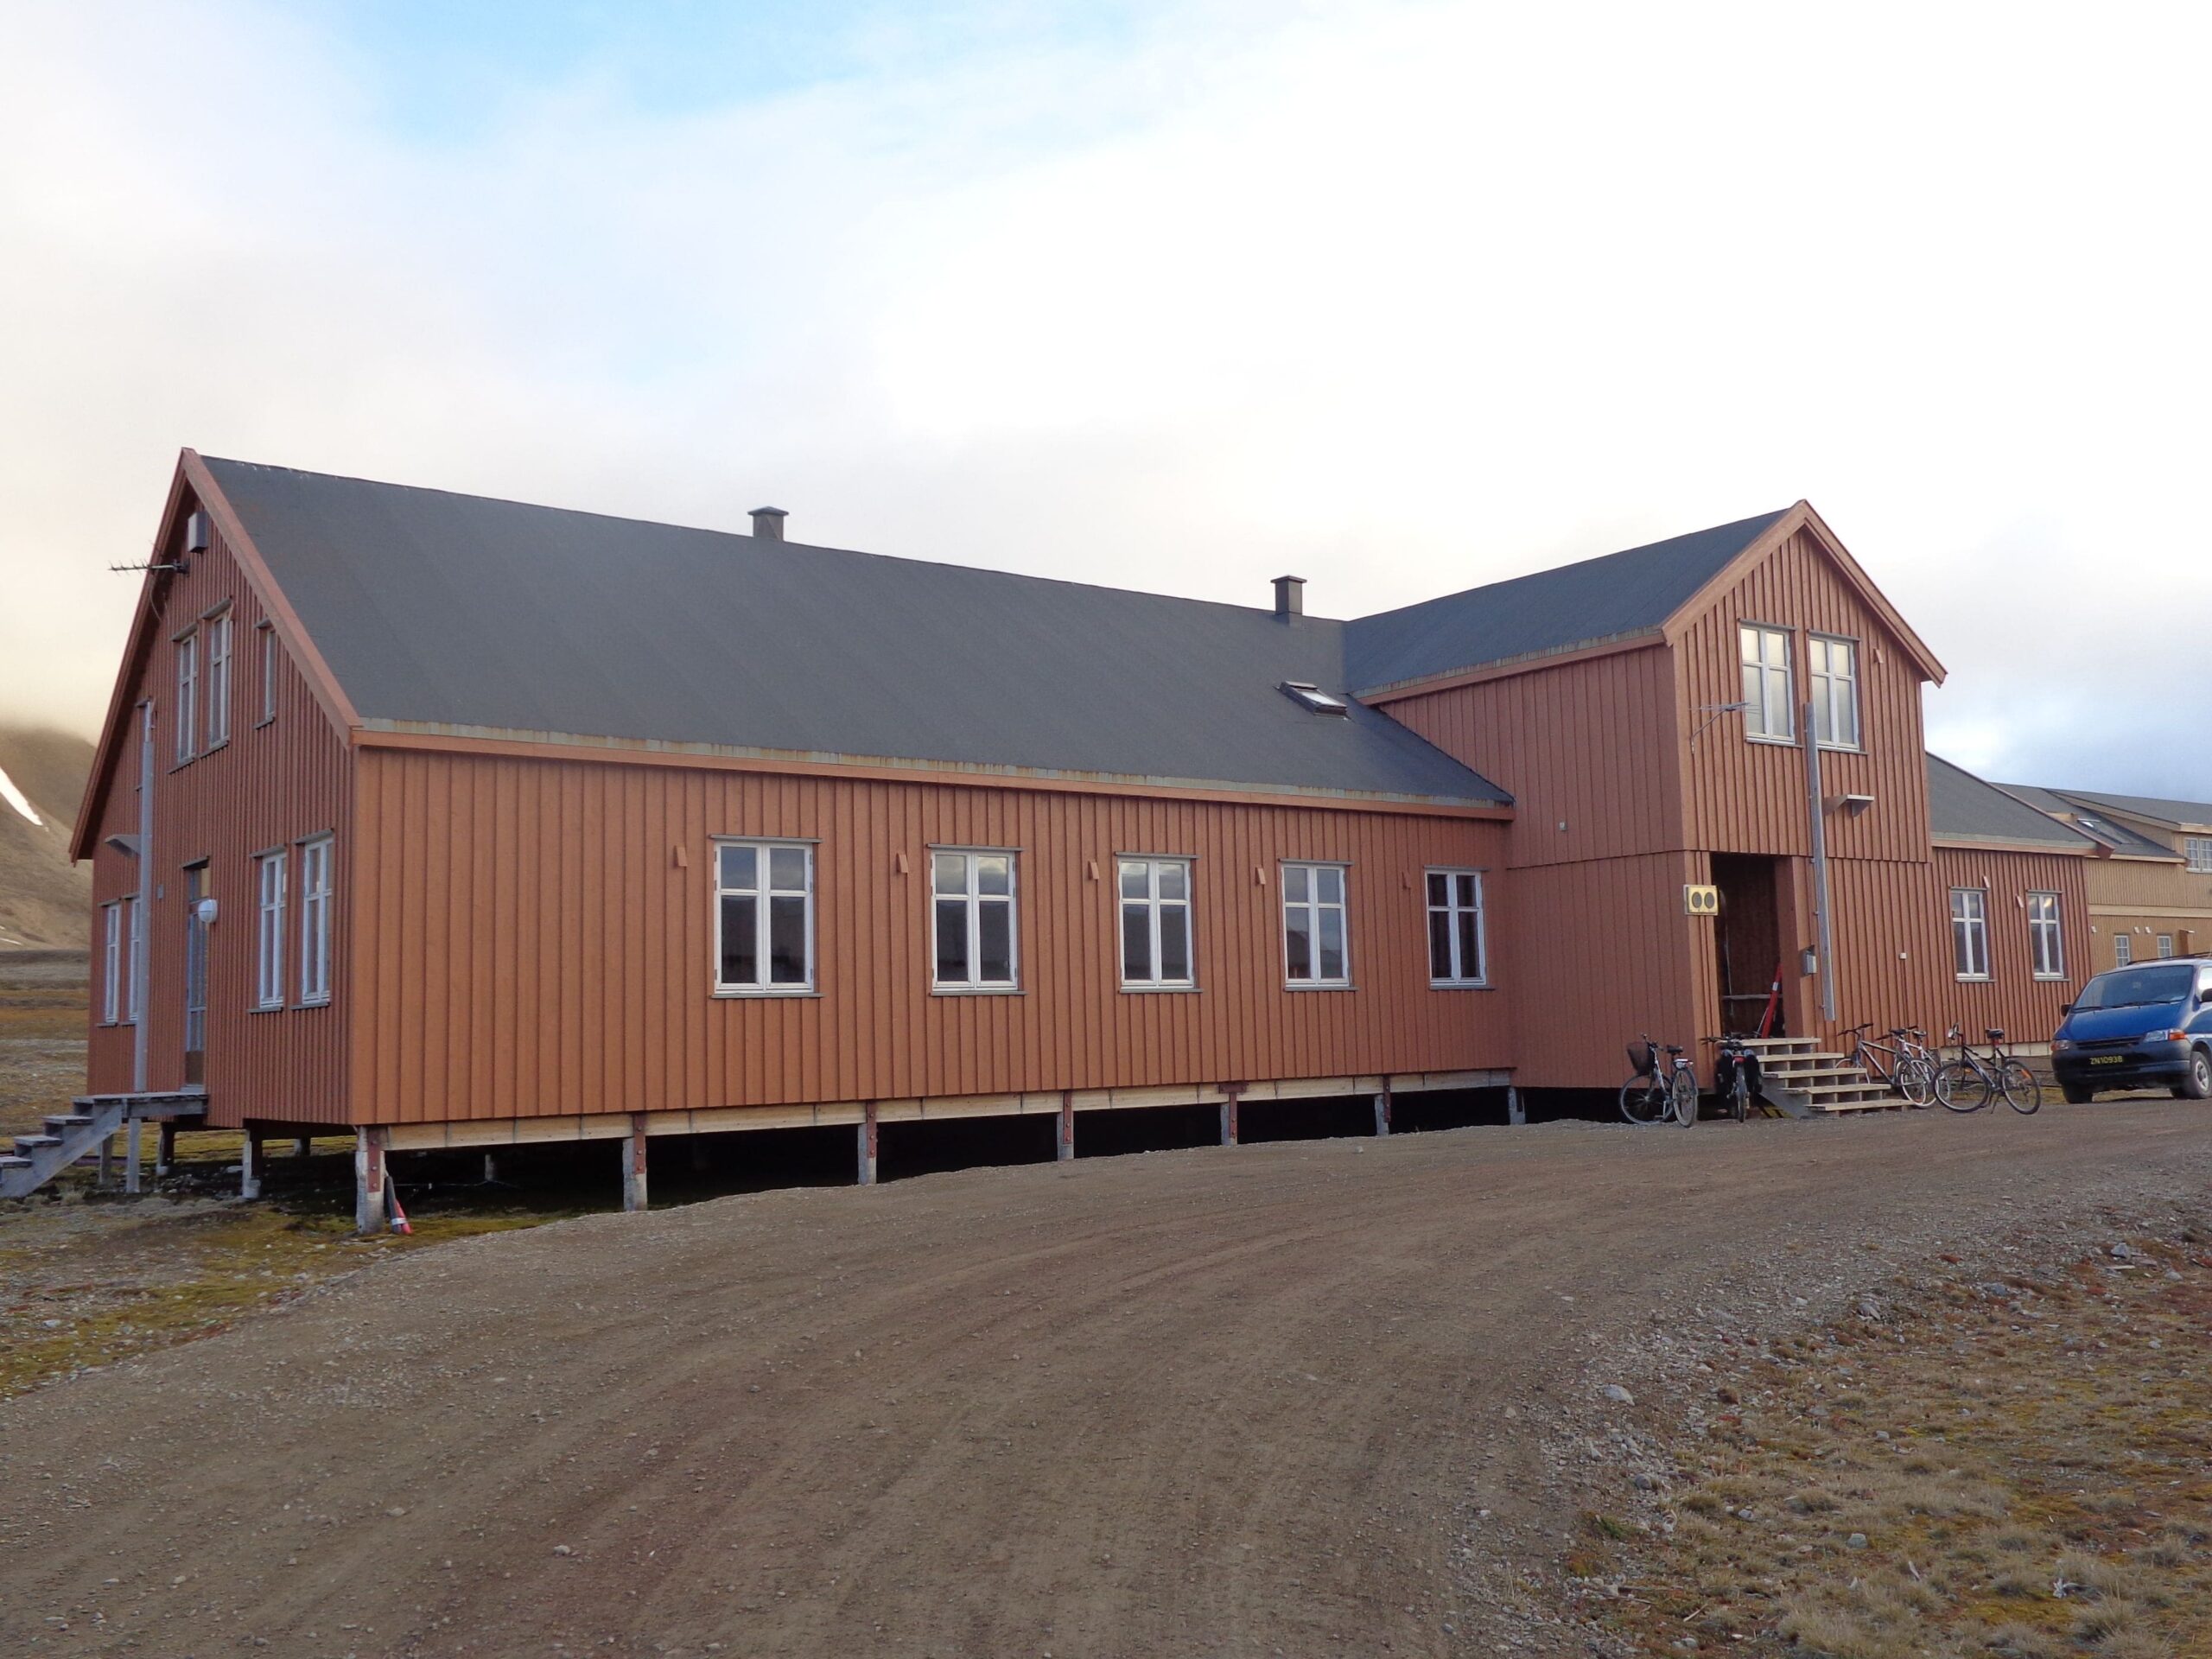 A two story woode house - Italian research station Stazione Dirigibile Italia in Ny-Ålesund - with a gravel road in front of it